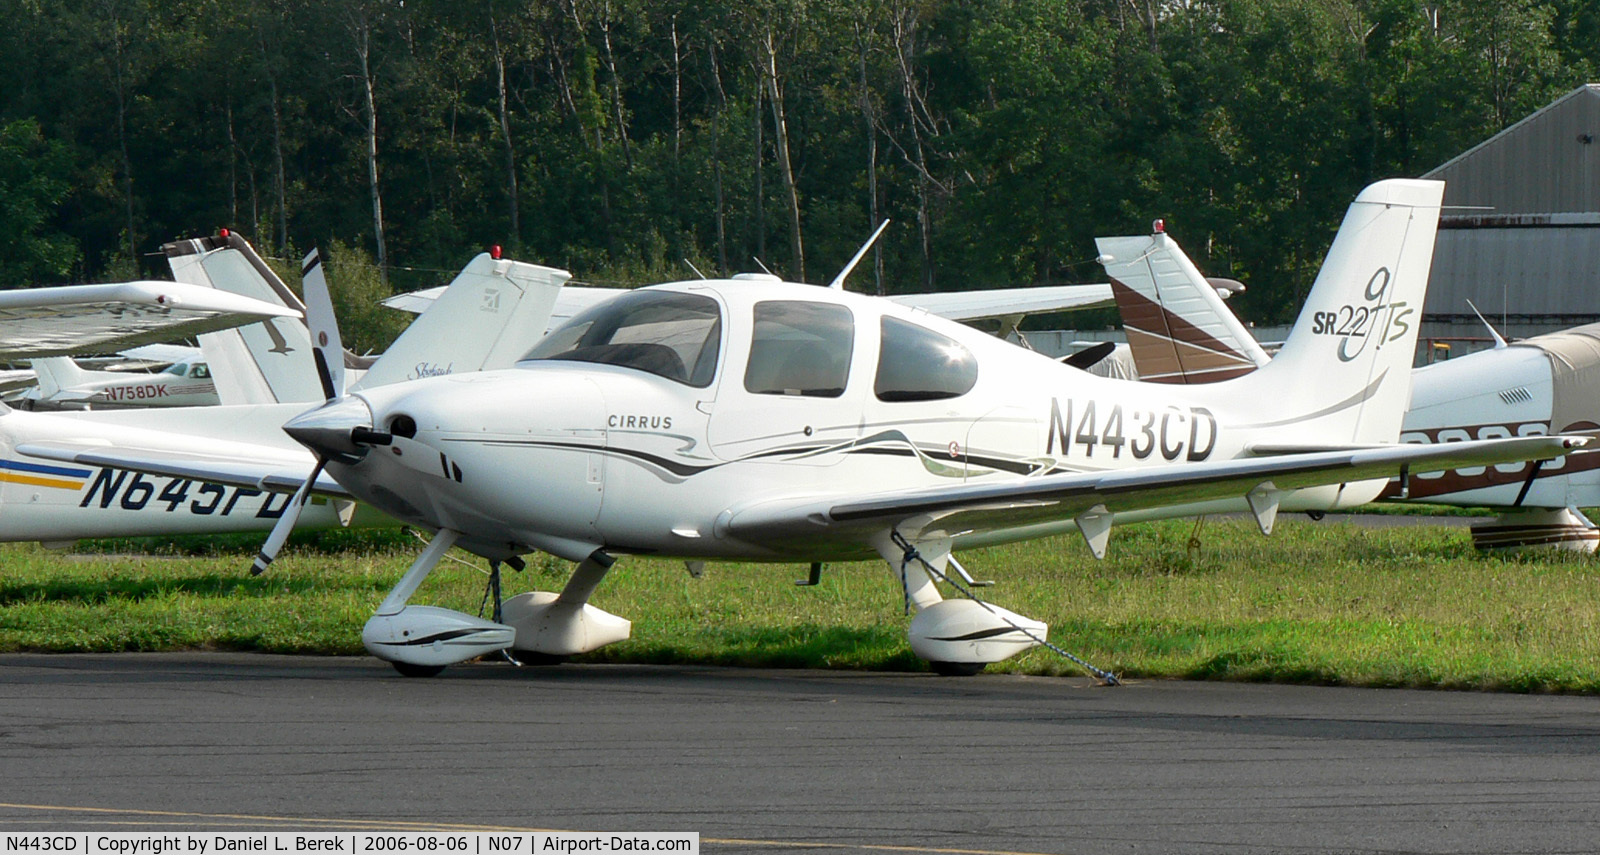 N443CD, 2004 Cirrus SR22 C/N 1190, New Cirrus shows her plumage on the crowded ramp at Lincoln Park, NJ.